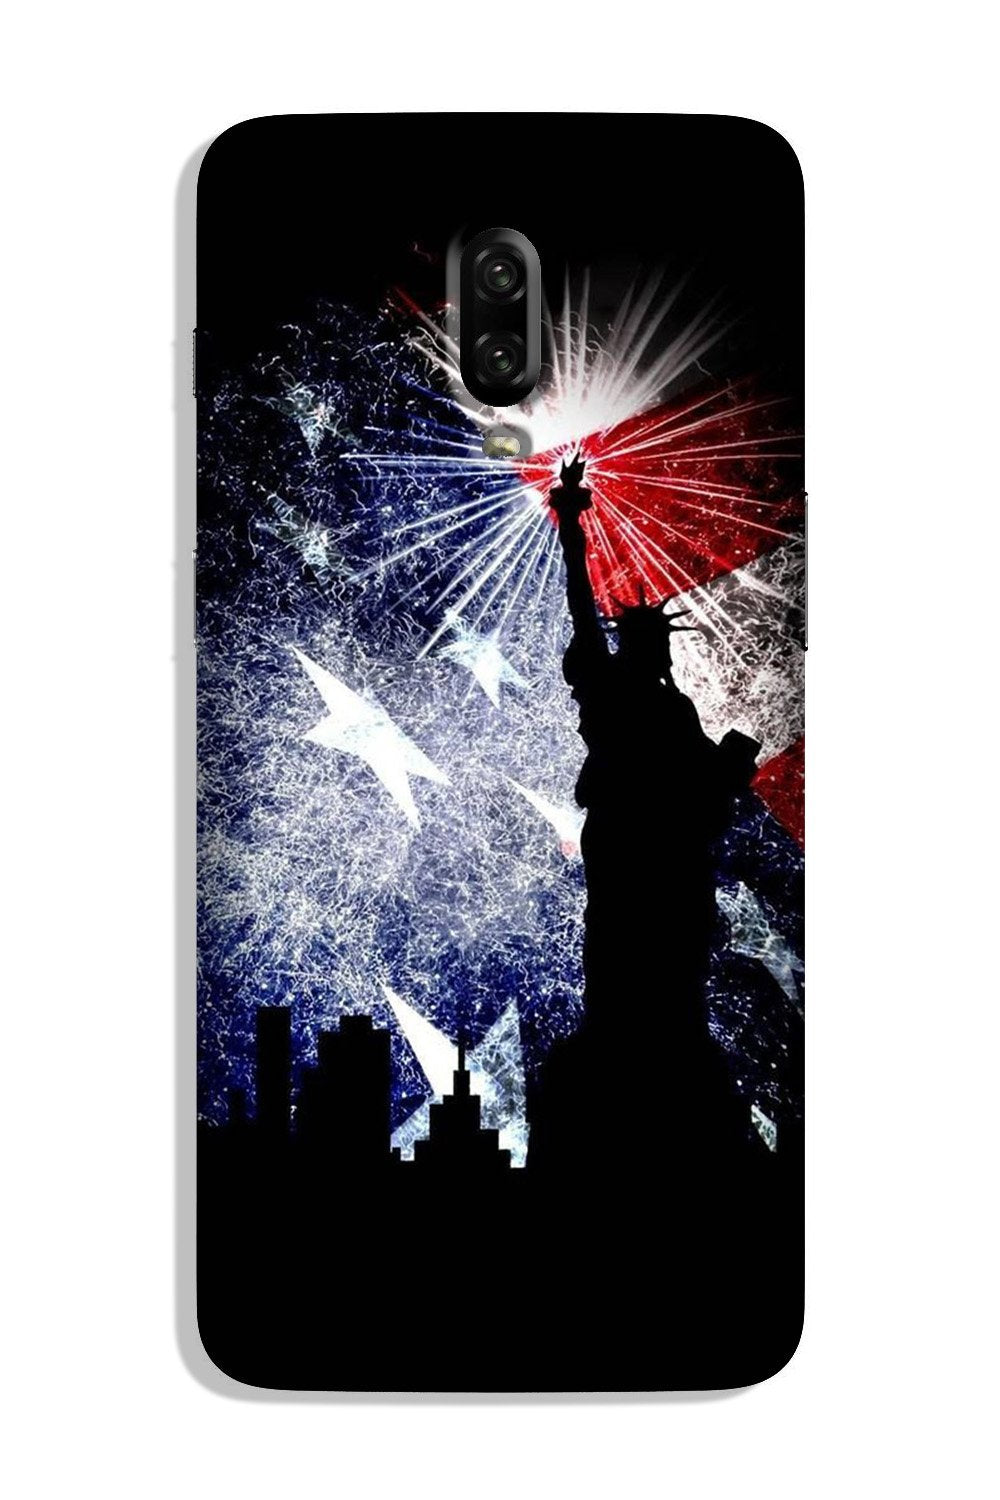 Statue of Unity Case for OnePlus 7 (Design No. 294)